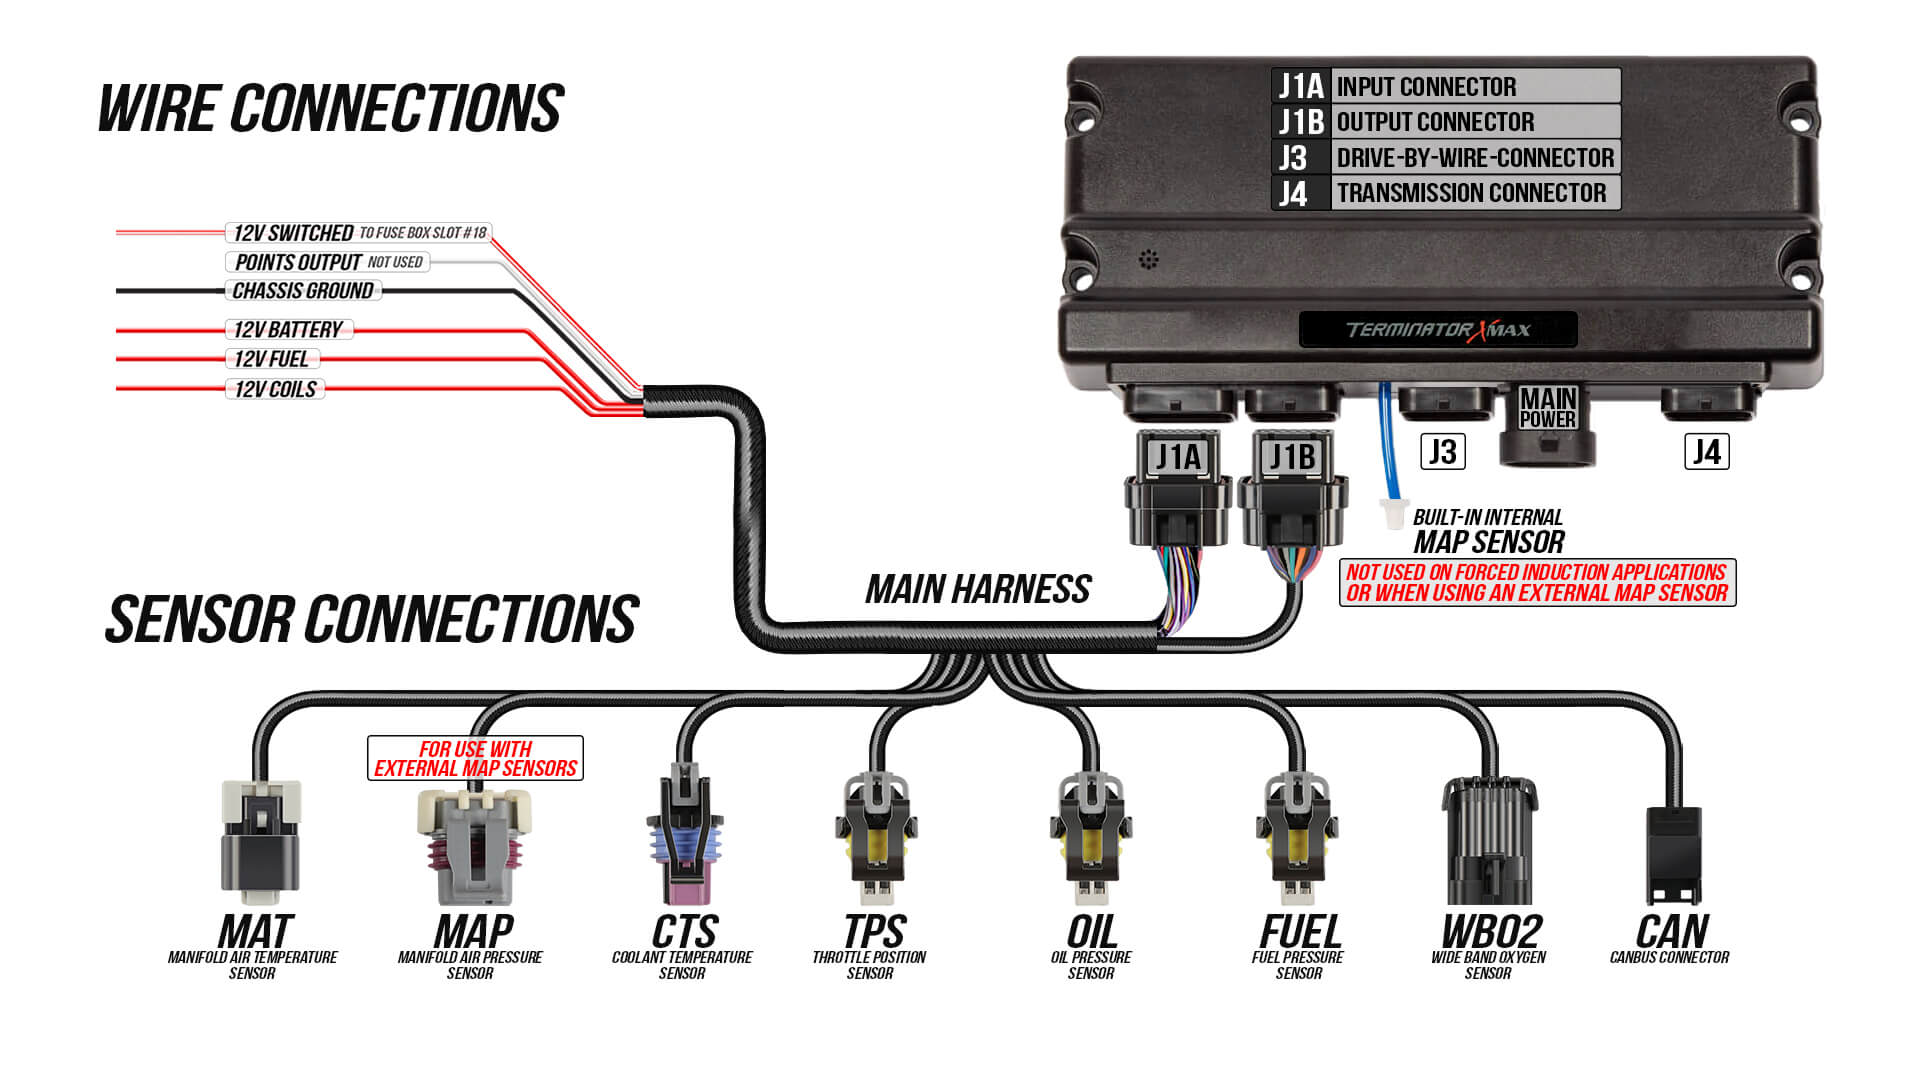 Wiring Diagram Sensor Connections